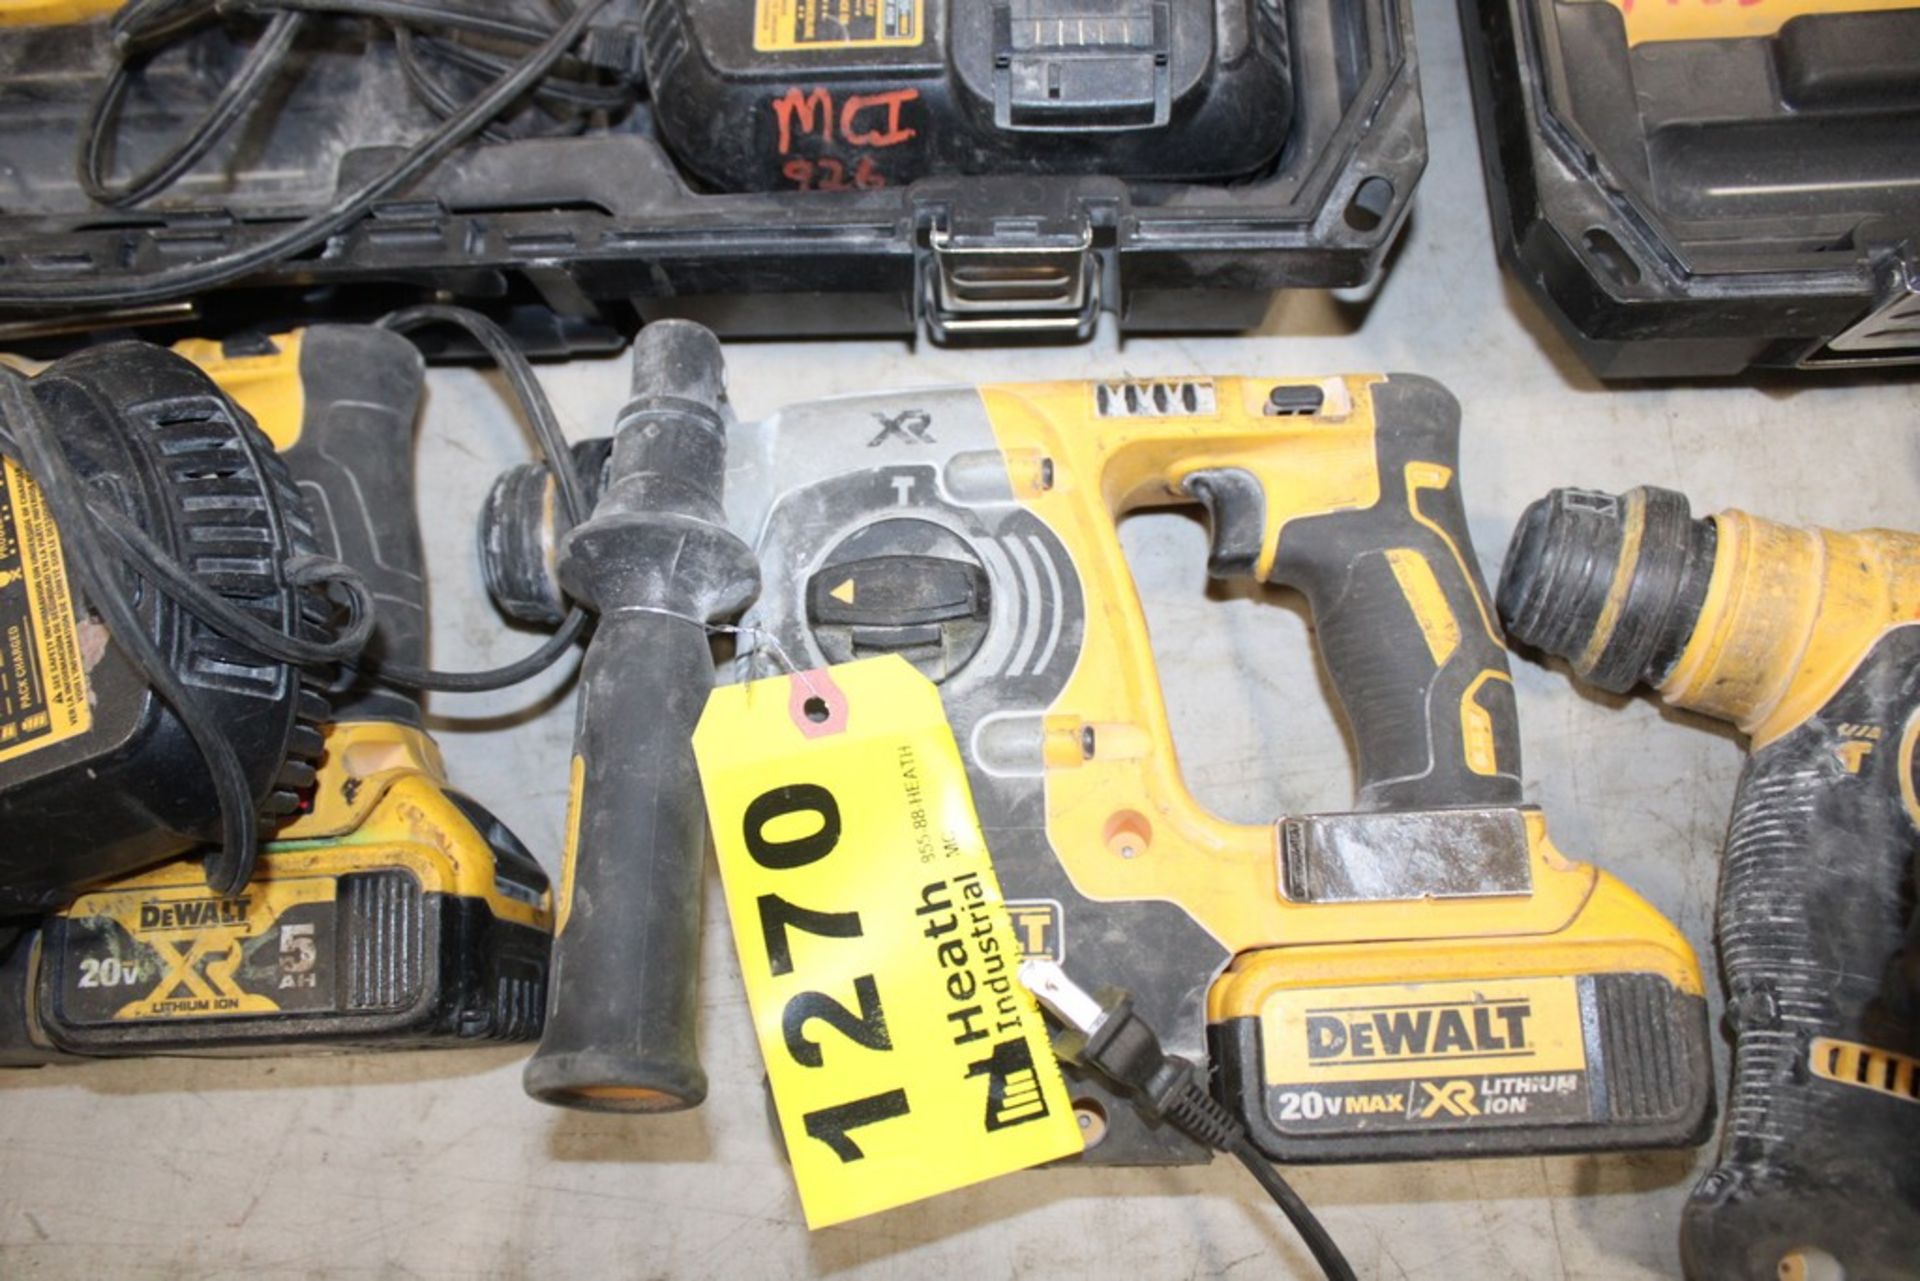 DEWALT MODEL NO. DCH273 20V CORDLESS 1" SDS BRUSHLESS HAMMER DRILL WITH BATTERY AND CHARGER - Image 2 of 2